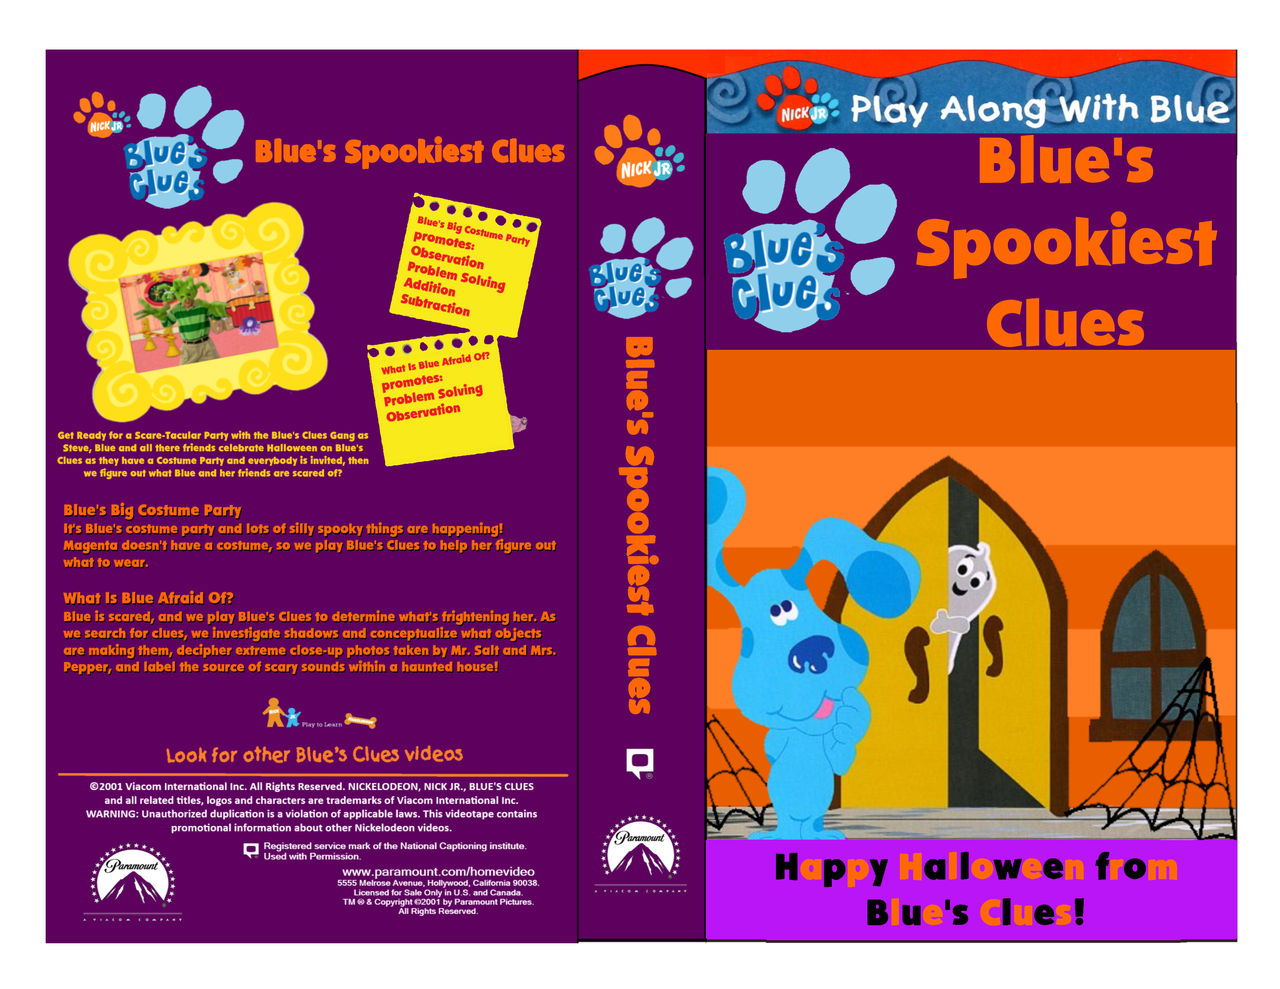 Blue's Spookiest Clues Homemade VHS Cover by PandaFan1999 on DeviantArt